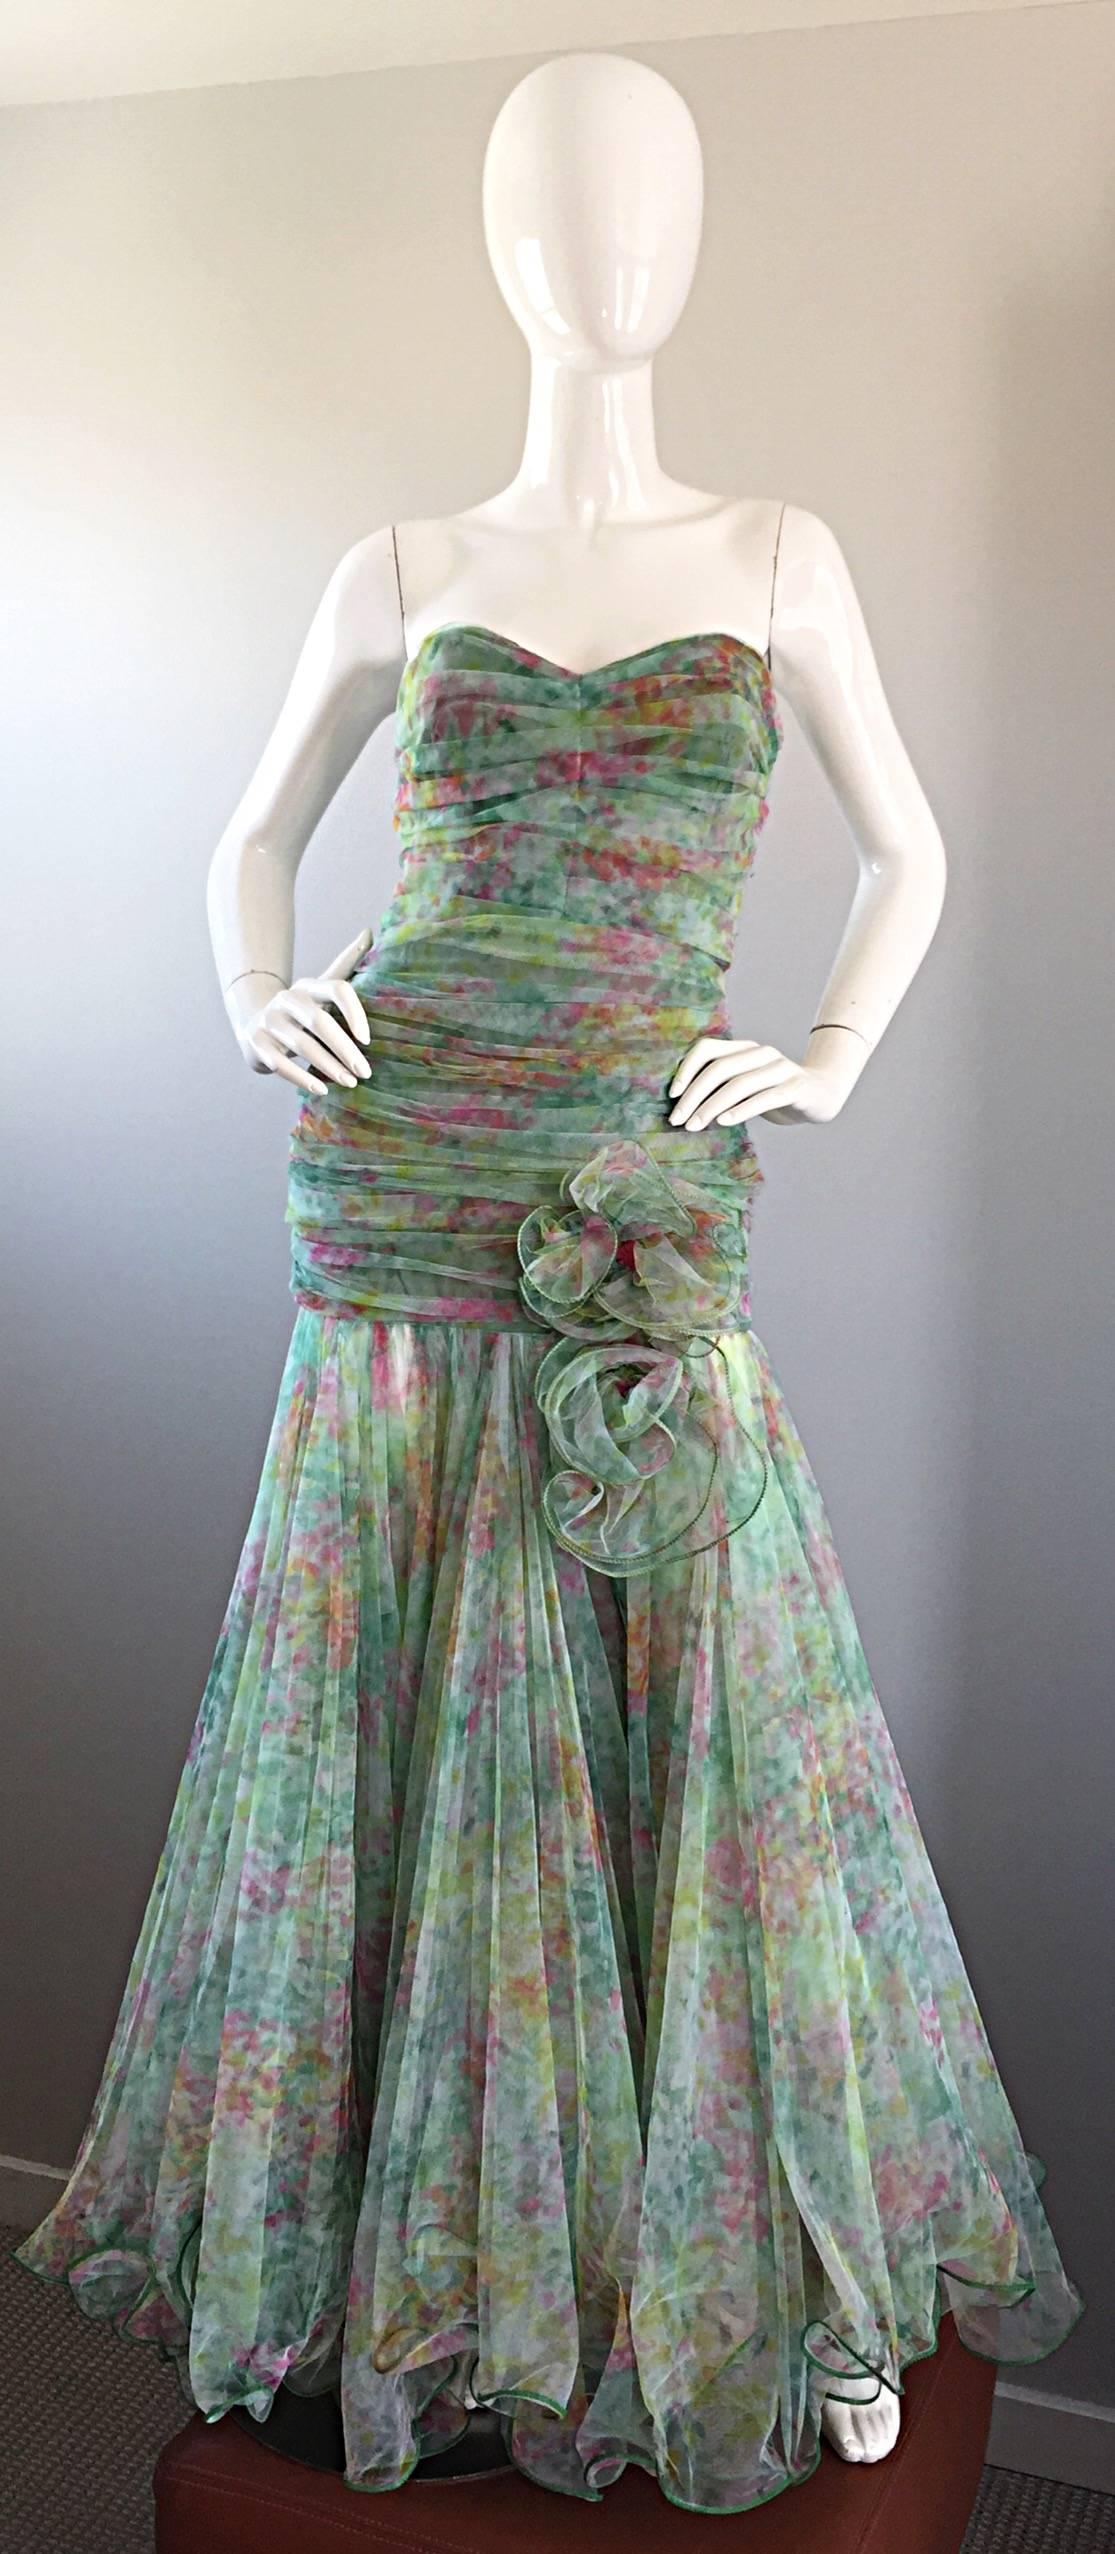 Sensational 1980s / 80s JEAN JACQUES BERTRAND Couture strapless evening gown! Beautiful pastel colors of light green, pink, and yellow in a watercolor floral print on exquisite tulle. Ruched bodice is very flattering on, and leads into wonderful